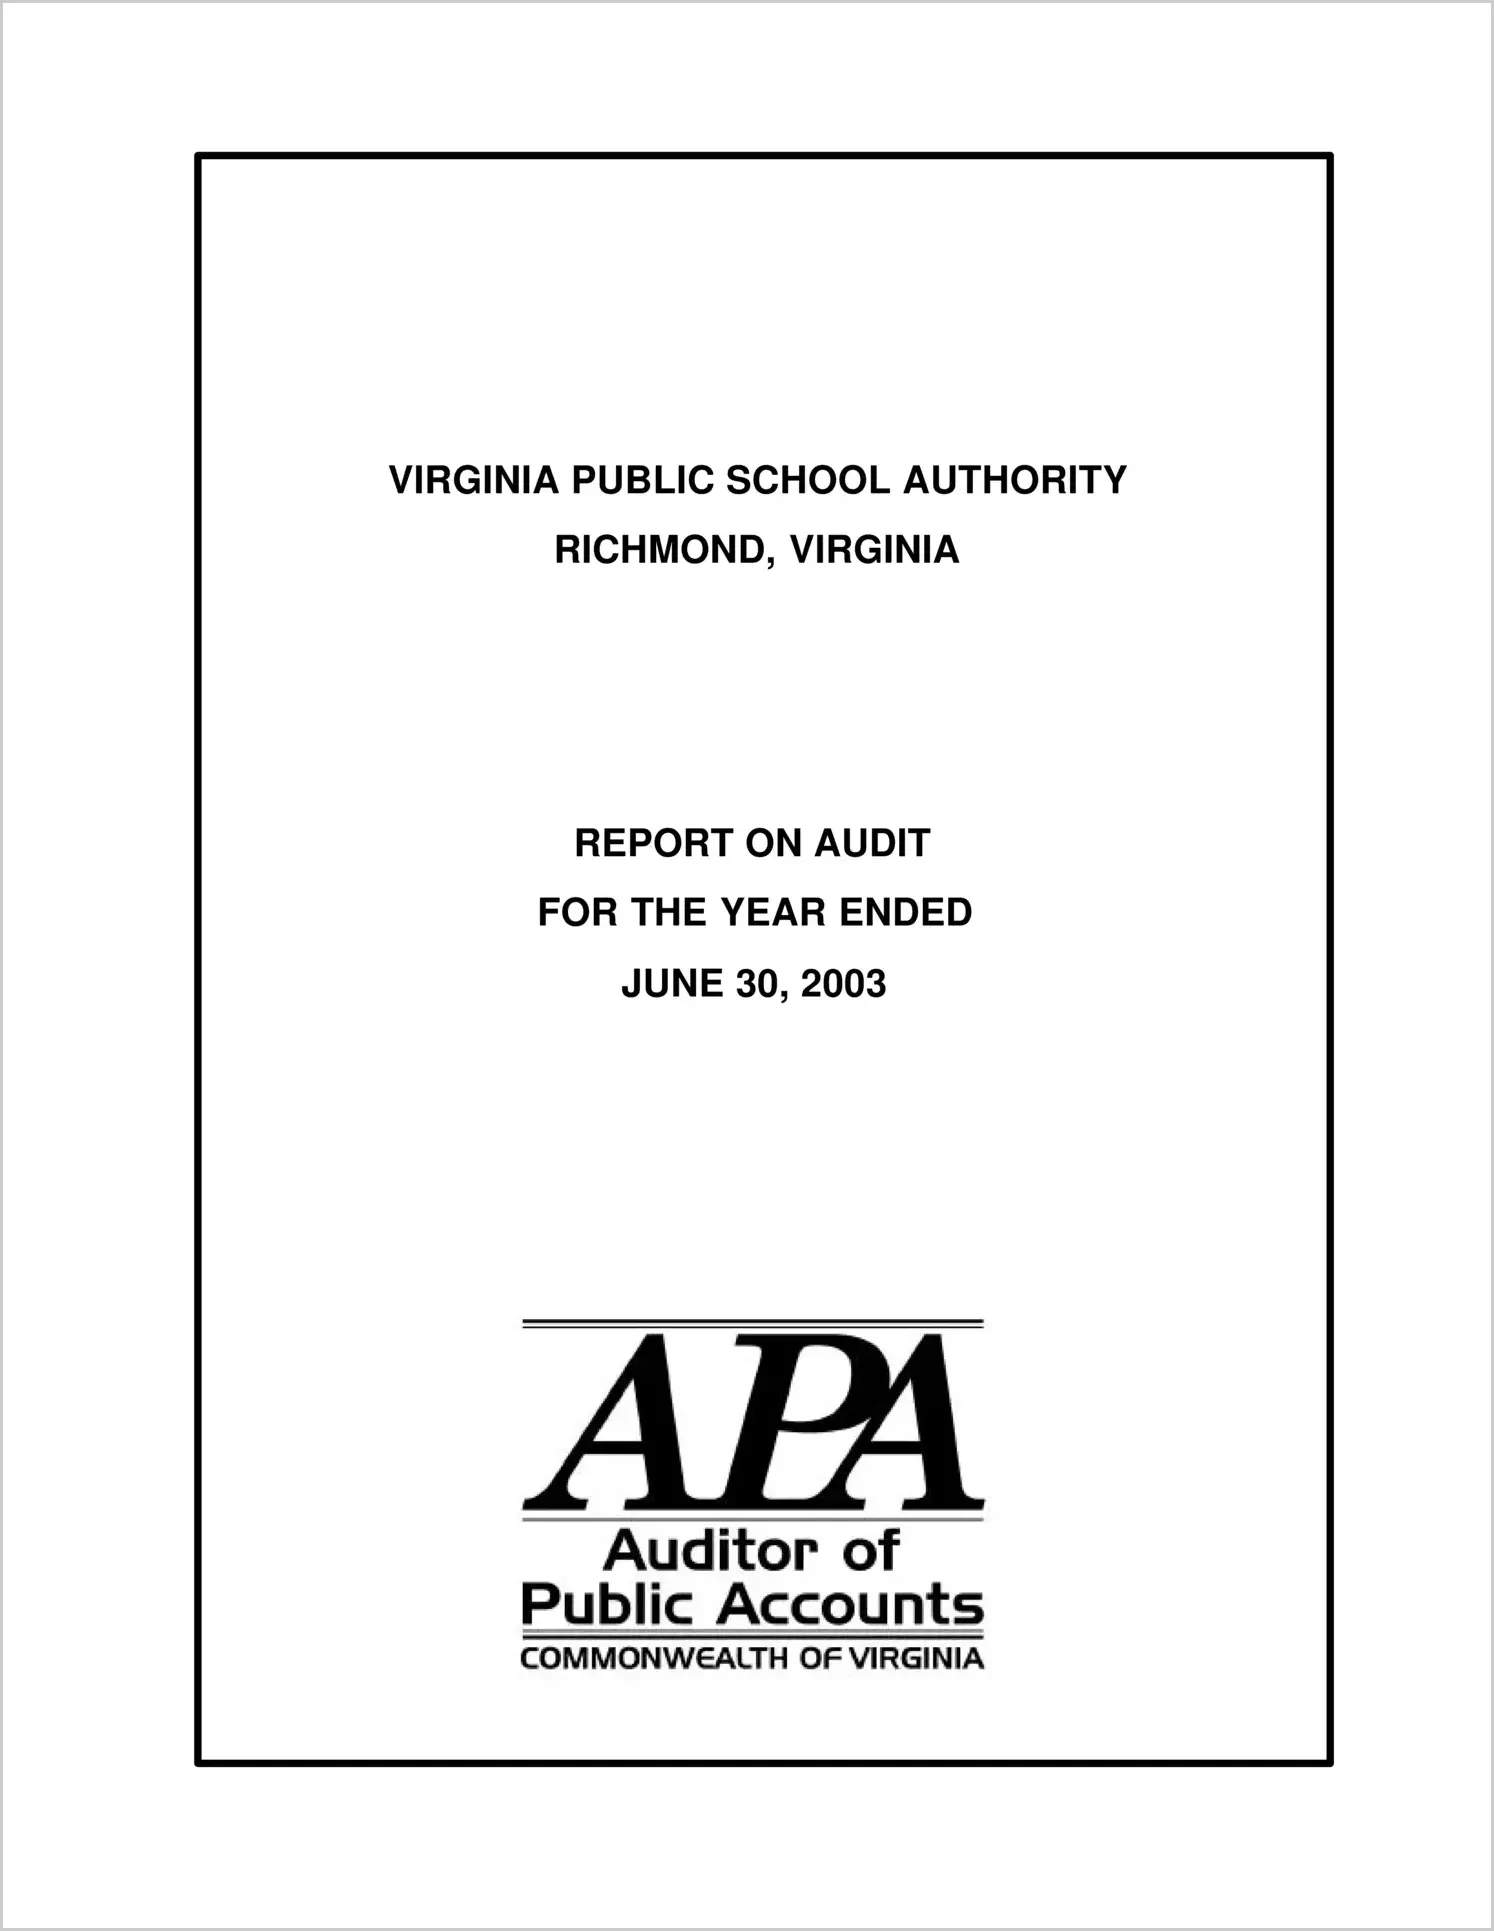 Virginia Public School Authority for the year ended June 30, 2003